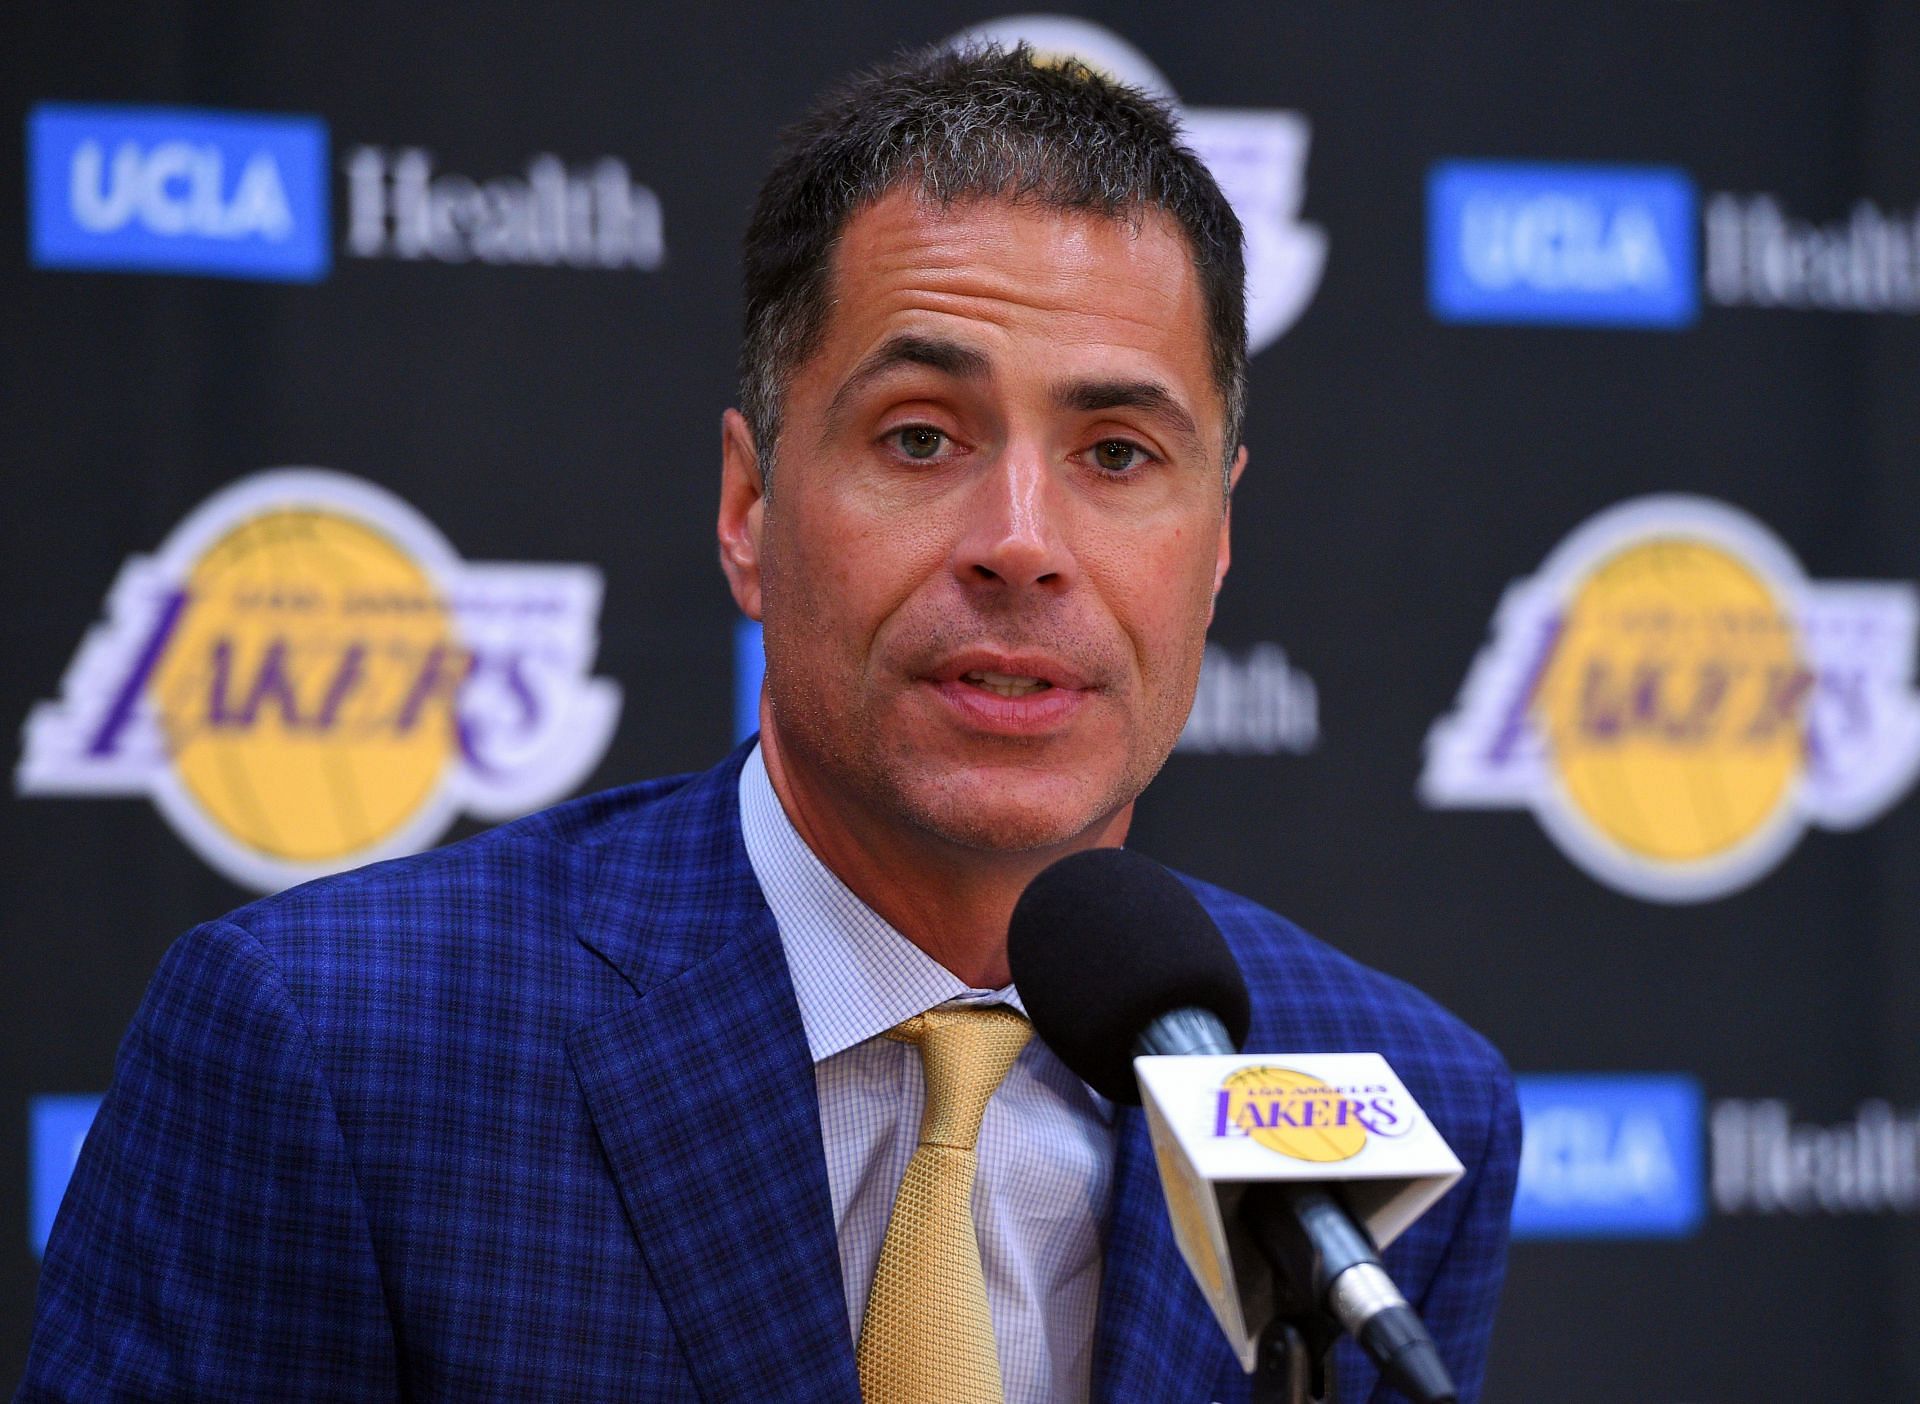 Rob Pelinka should be feeling the pressure now to keep &quot;King James&quot; happy and continue to play for the Los Angeles Lakers. [Photo: Orange County Register]